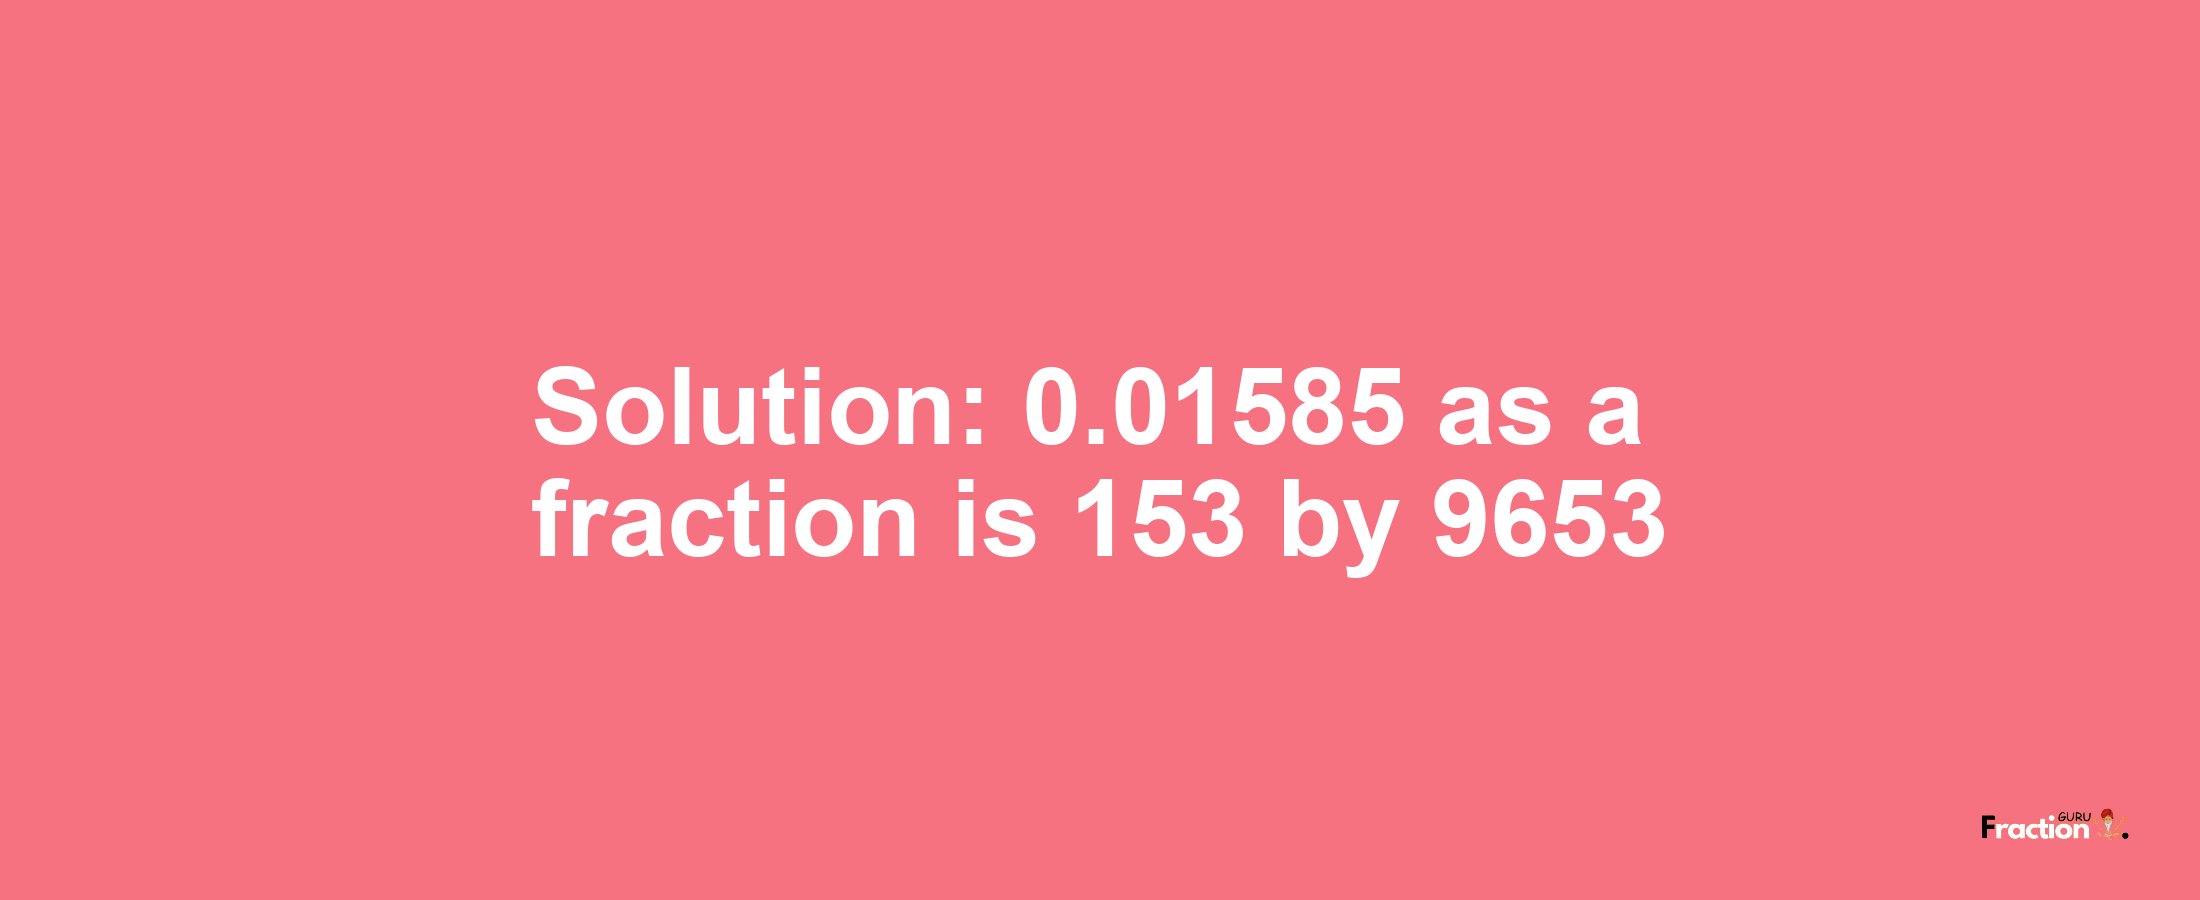 Solution:0.01585 as a fraction is 153/9653